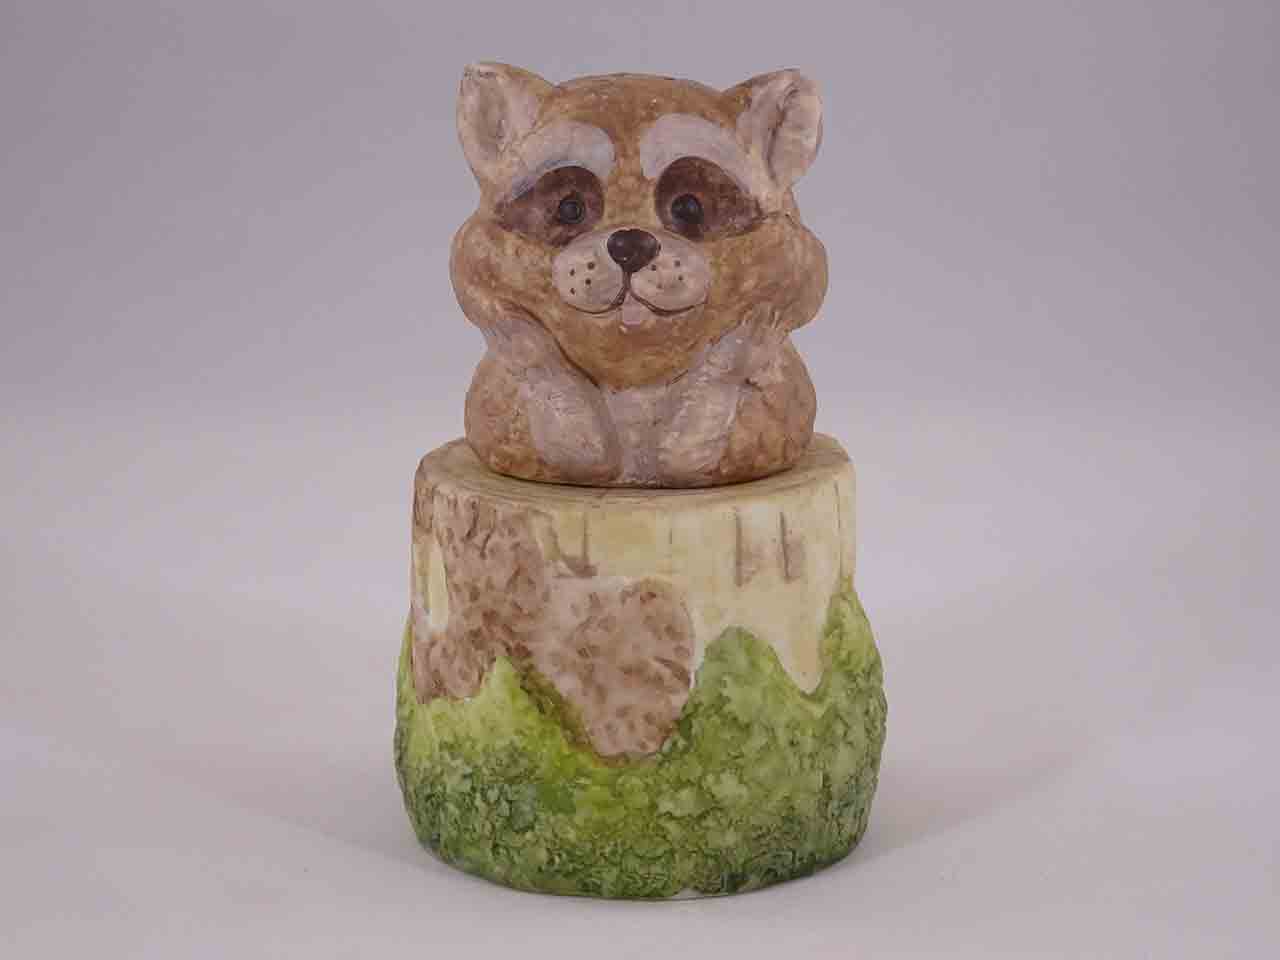 Animals on Tree Stumps Stacker Series Salt and Pepper Shakers - Raccoon